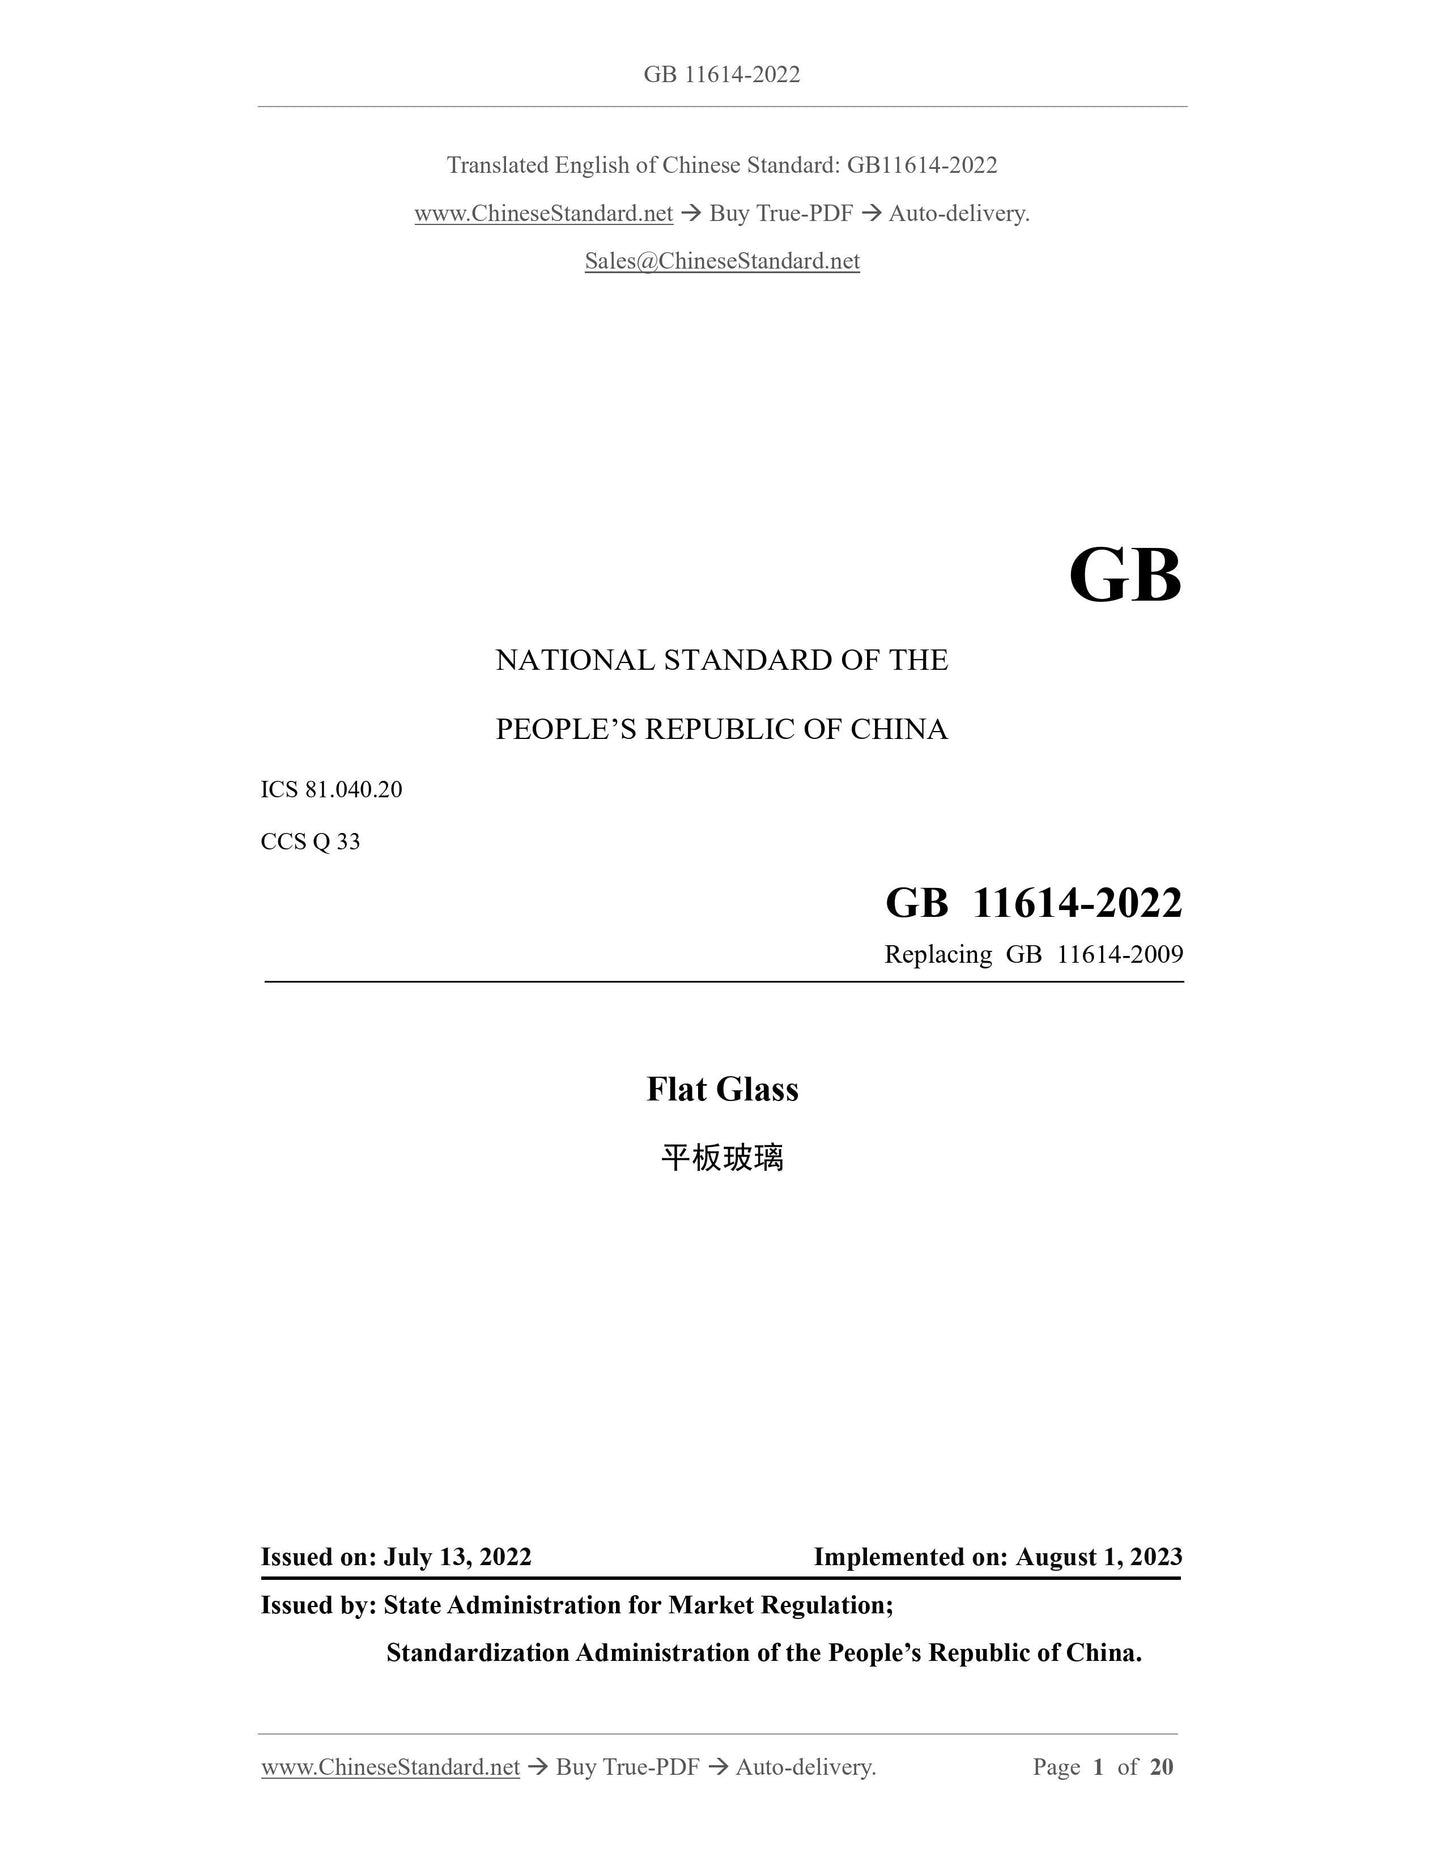 GB 11614-2022 Page 1